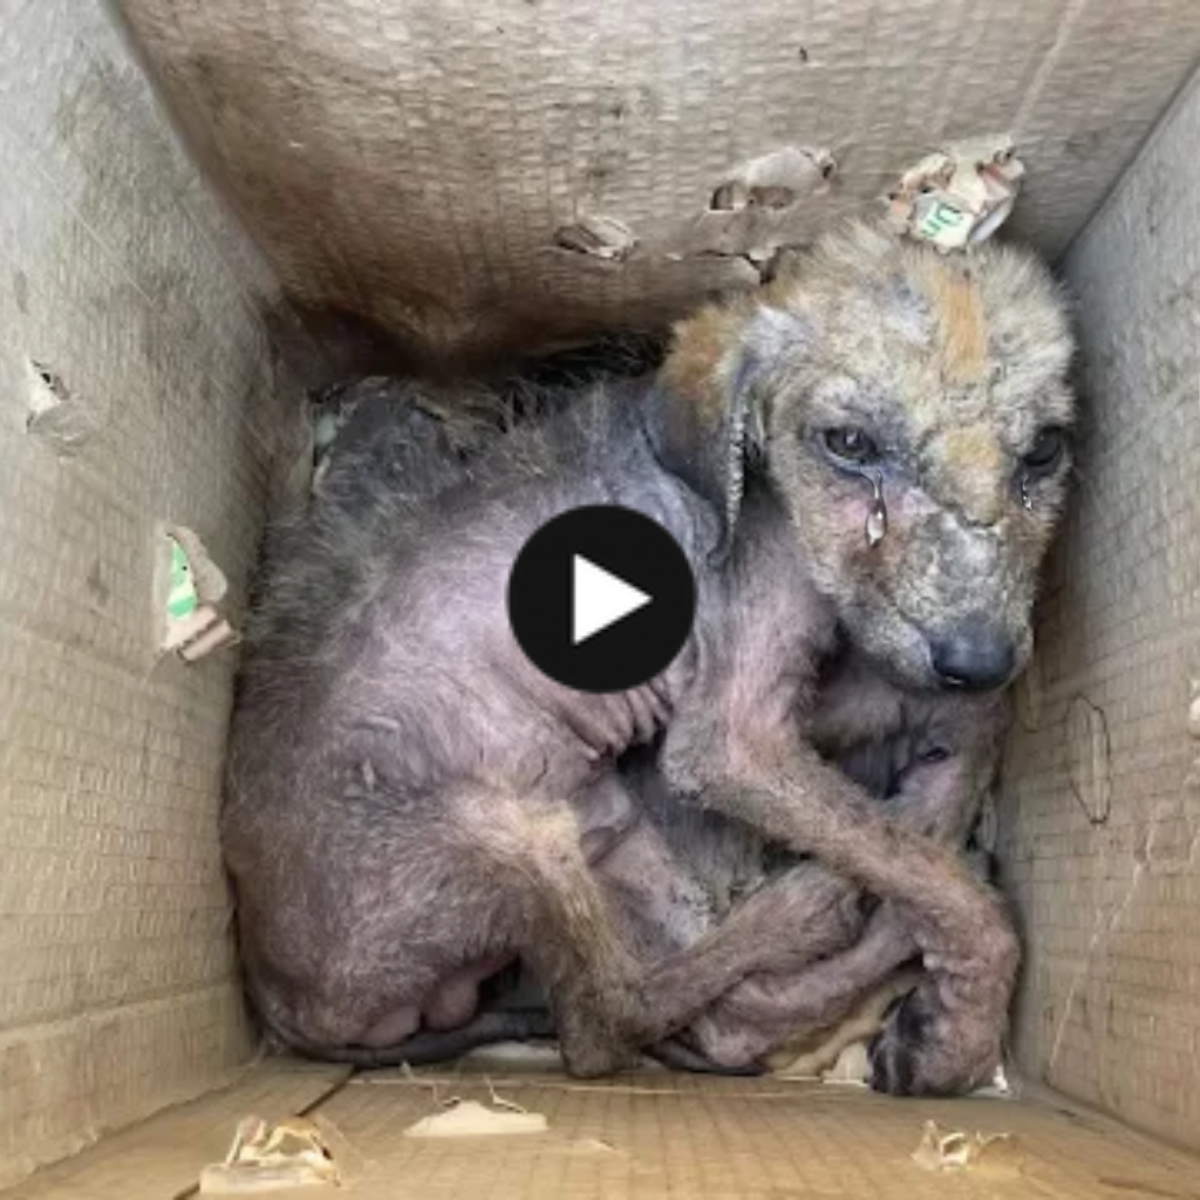 Desolate Abandonment: The Heartbreaking Anguish of a Little Orphaned Dog in an Unforgiving, Loveless World.